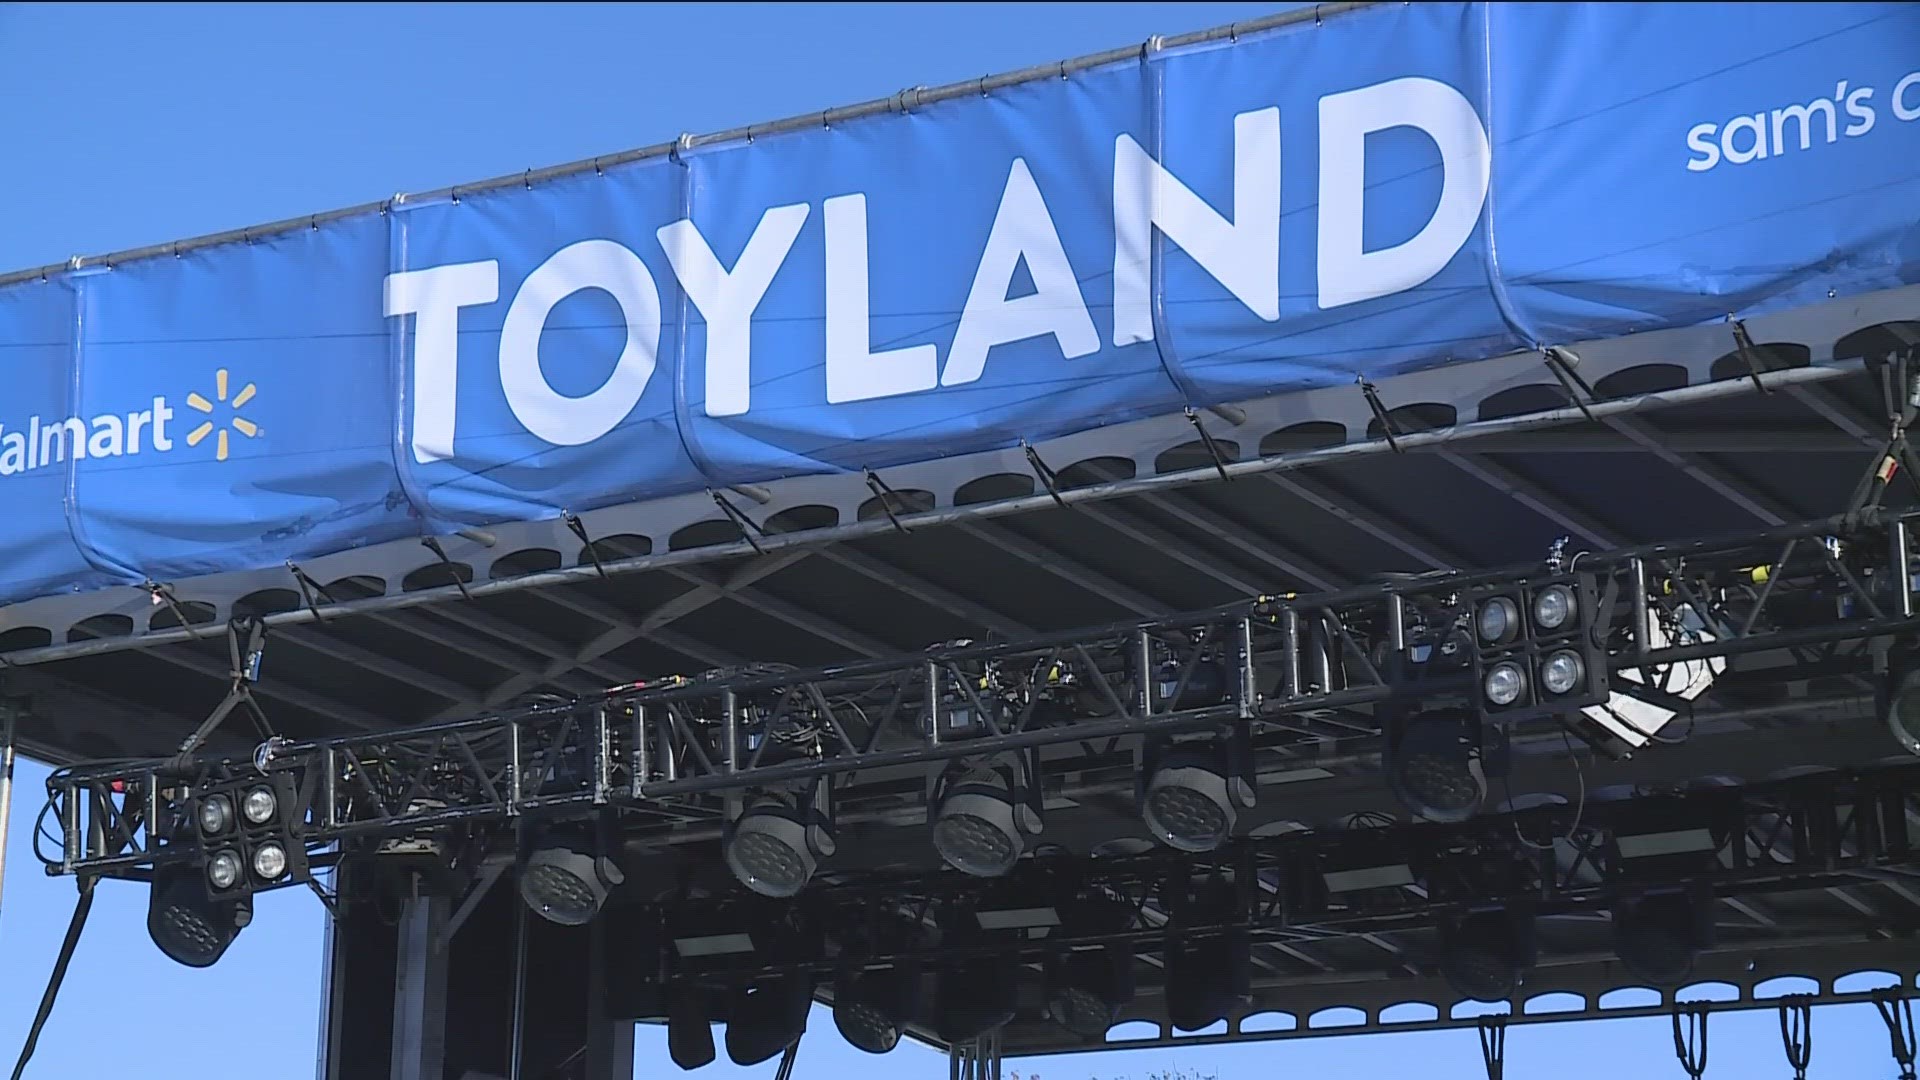 5NEWS visits Walmart's annual Toyland celebration, and Morgan Wrigley gets to have way too much fun